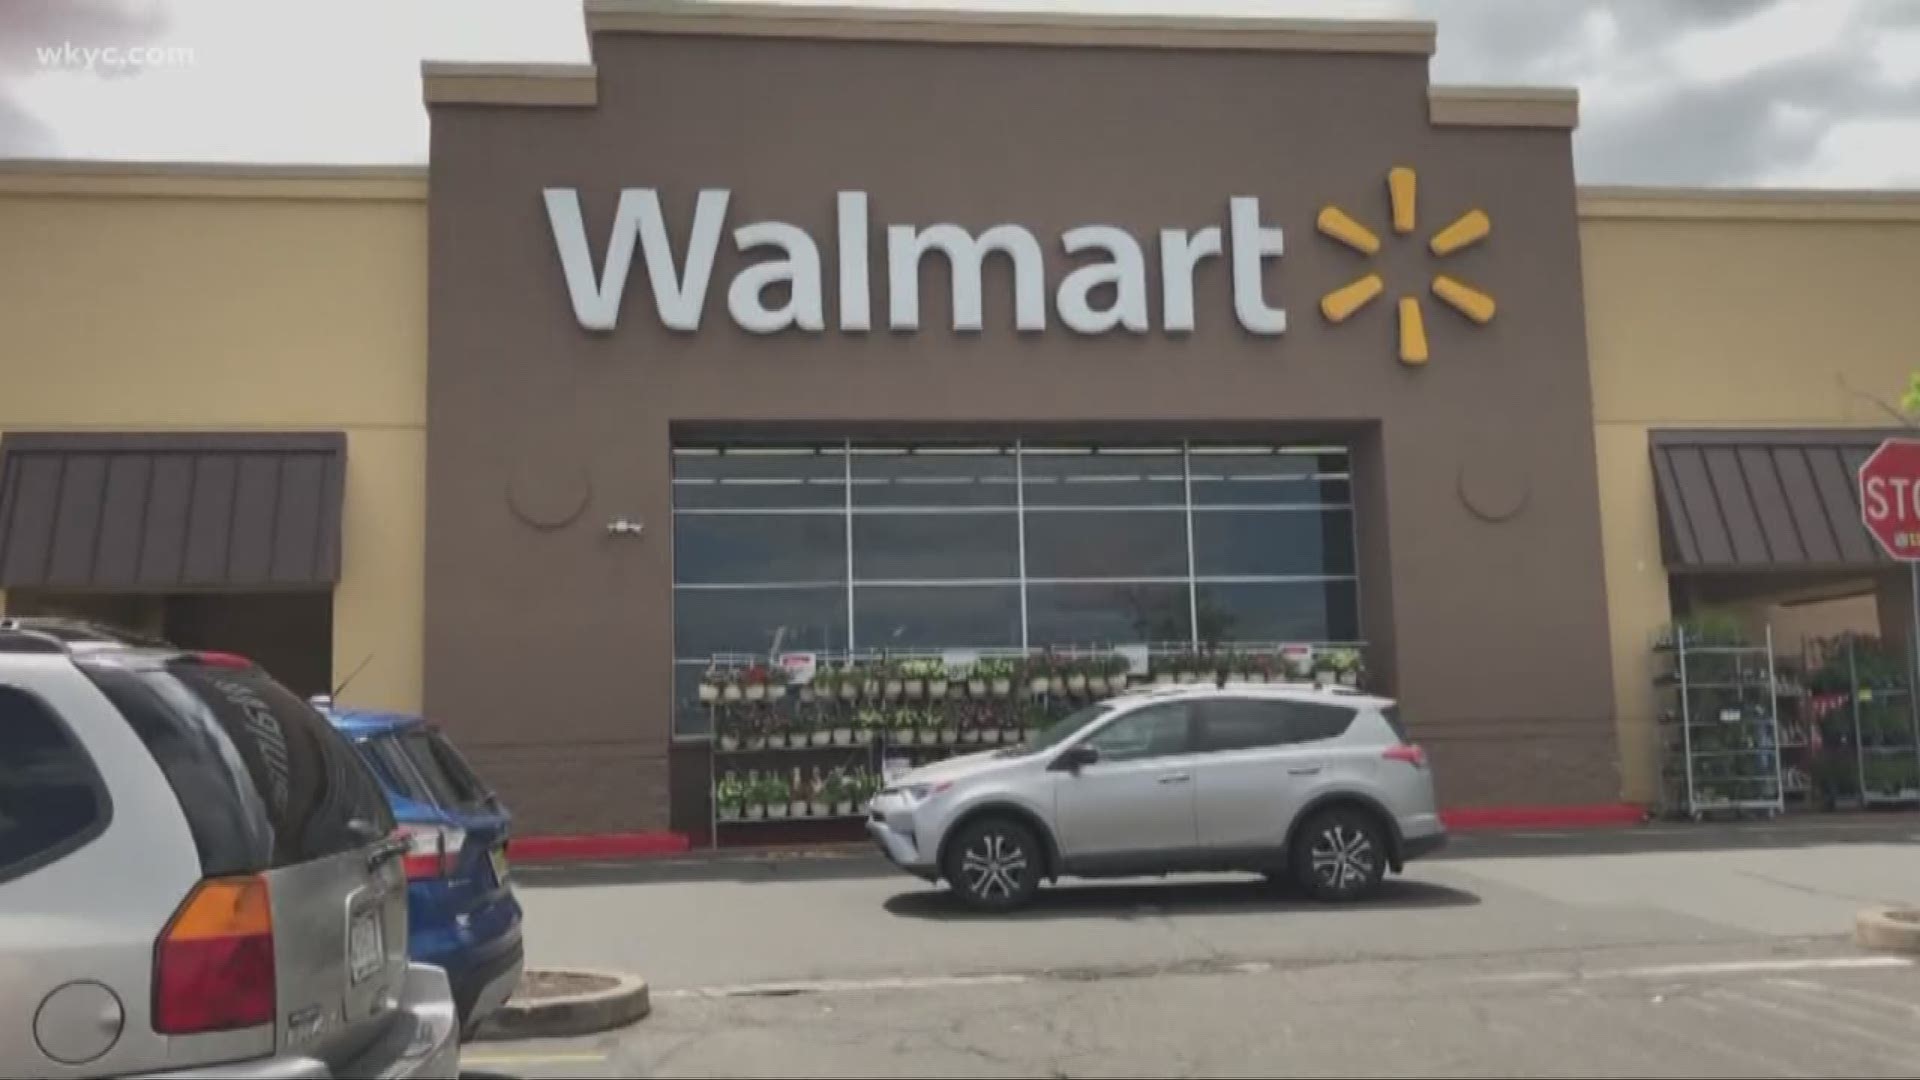 In response, the National Rifle Association called Walmart's decision 'shameful.'